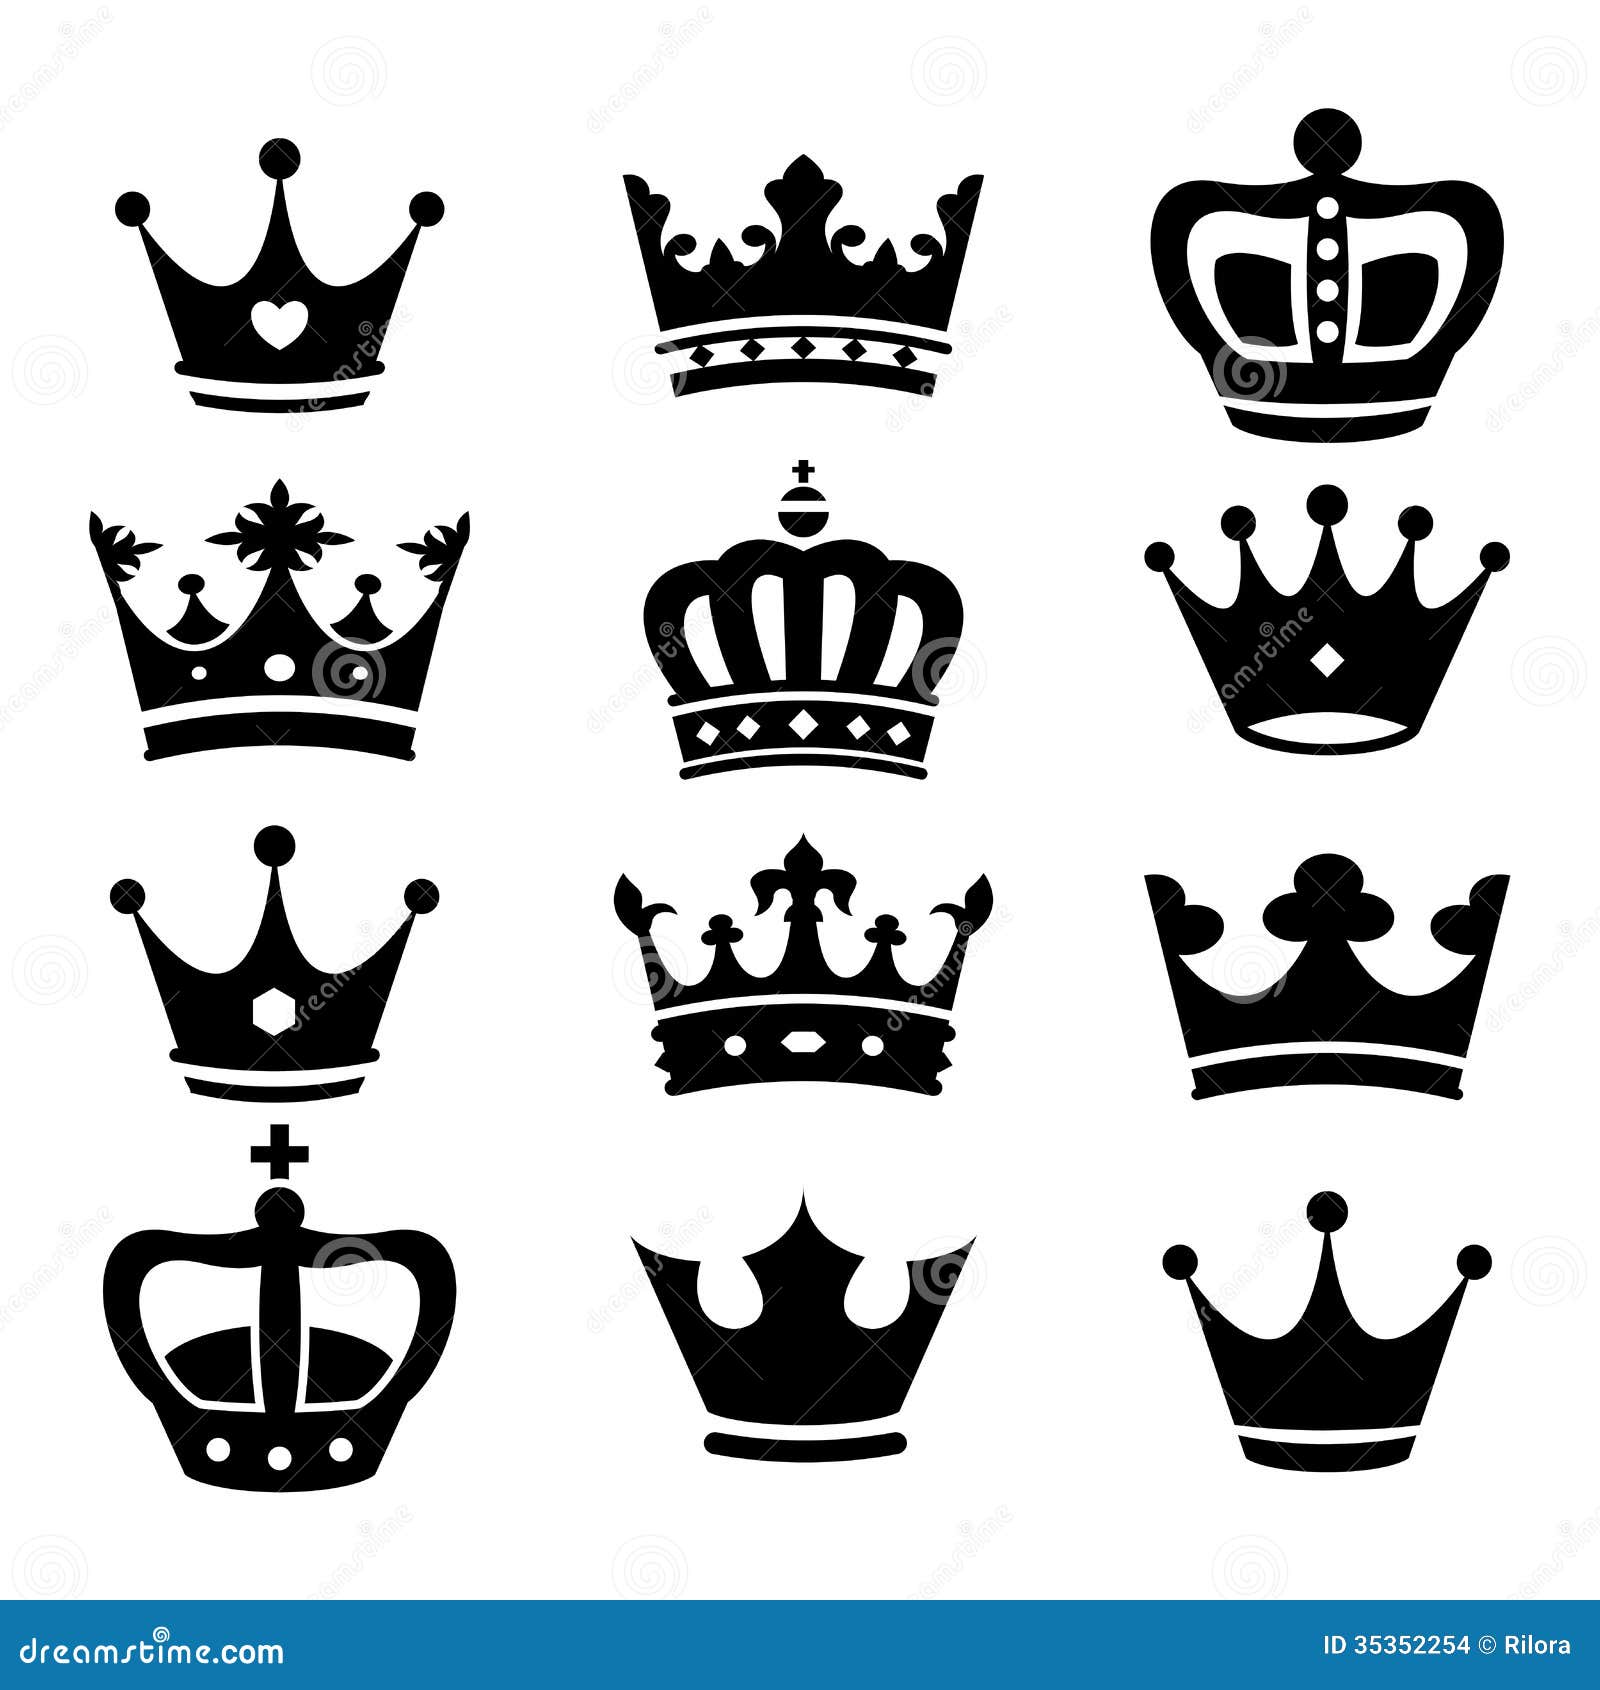 Download Crown Collection - Vector Silhouette Stock Vector ...